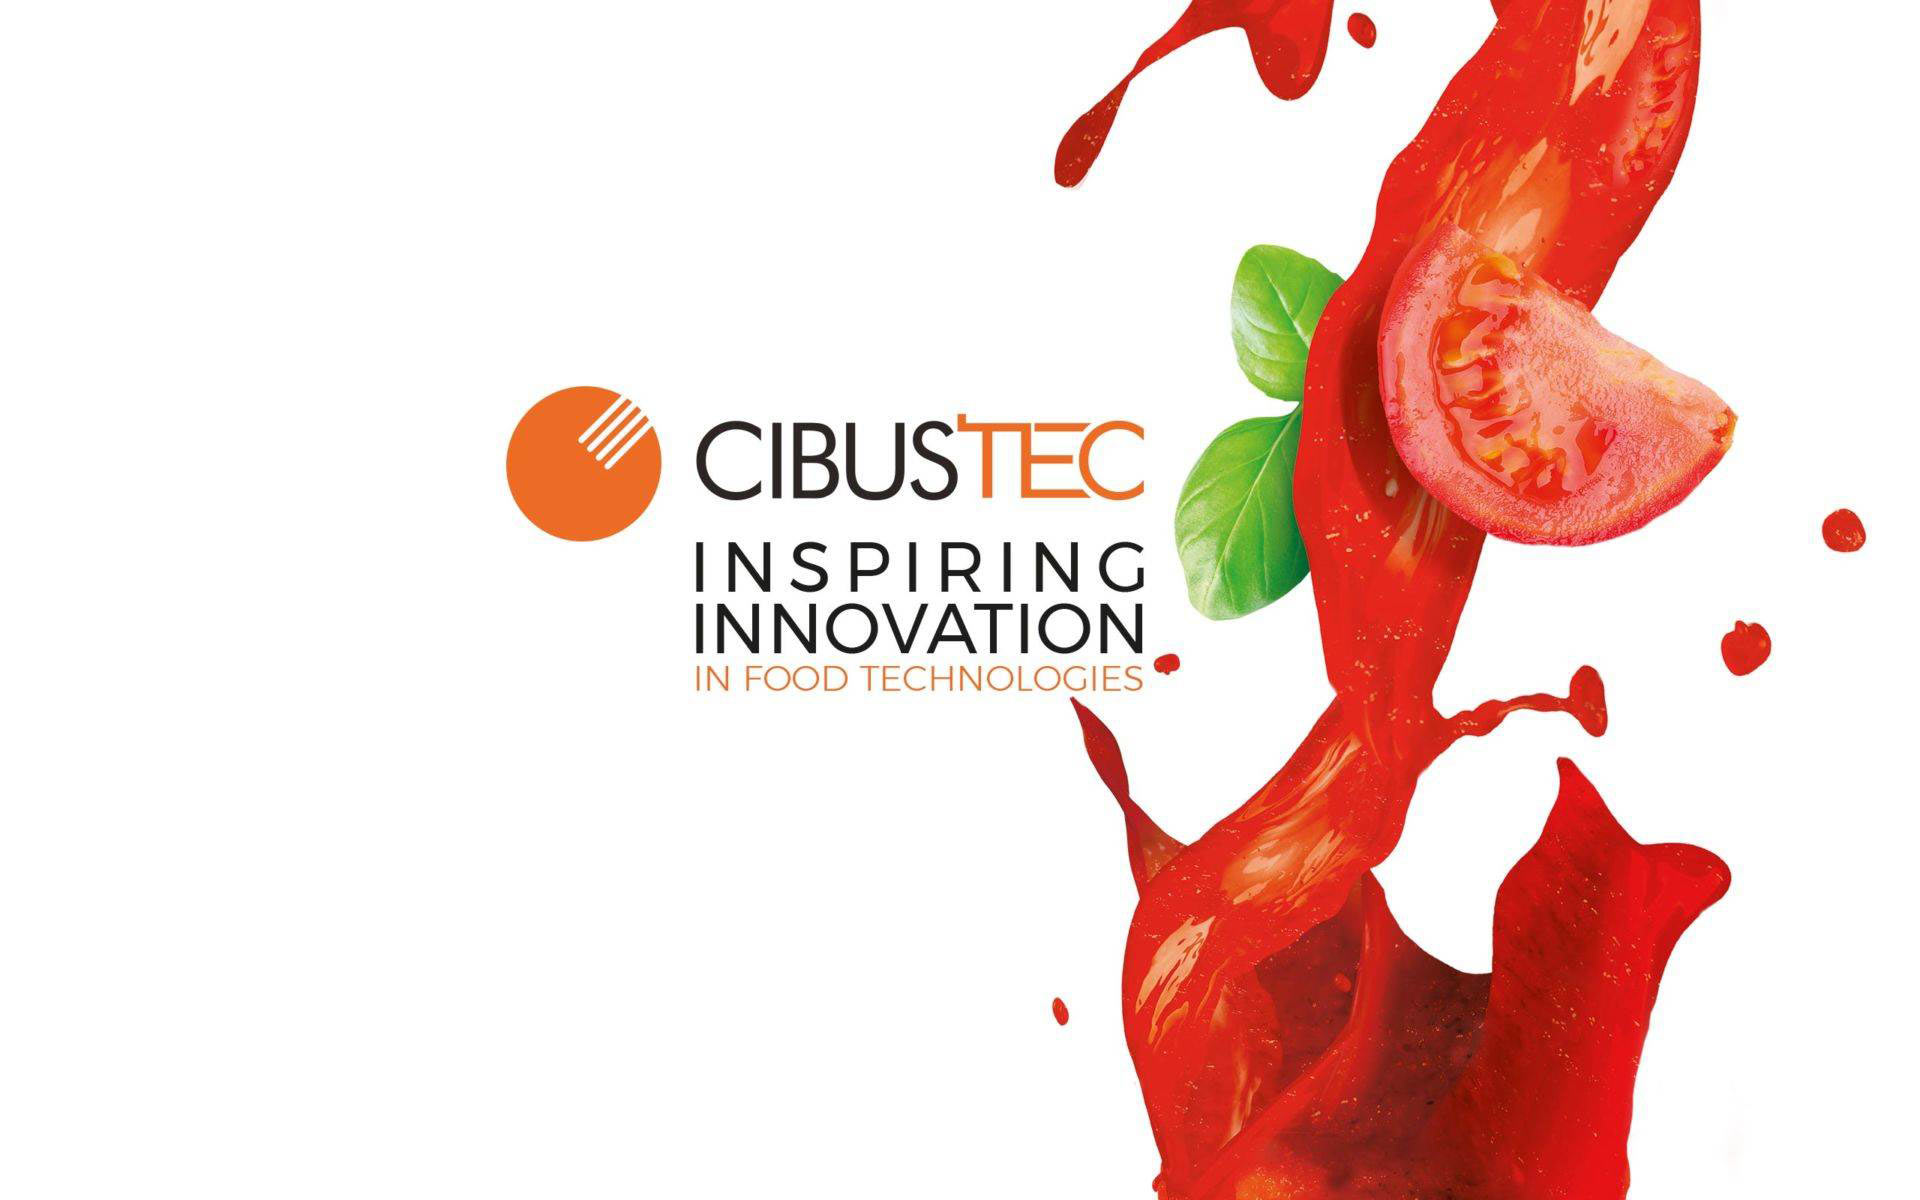 The “Red Gold from Europe” international promotional campaigns promoted by ANICAV were presented at Cibus Tech, Parma.